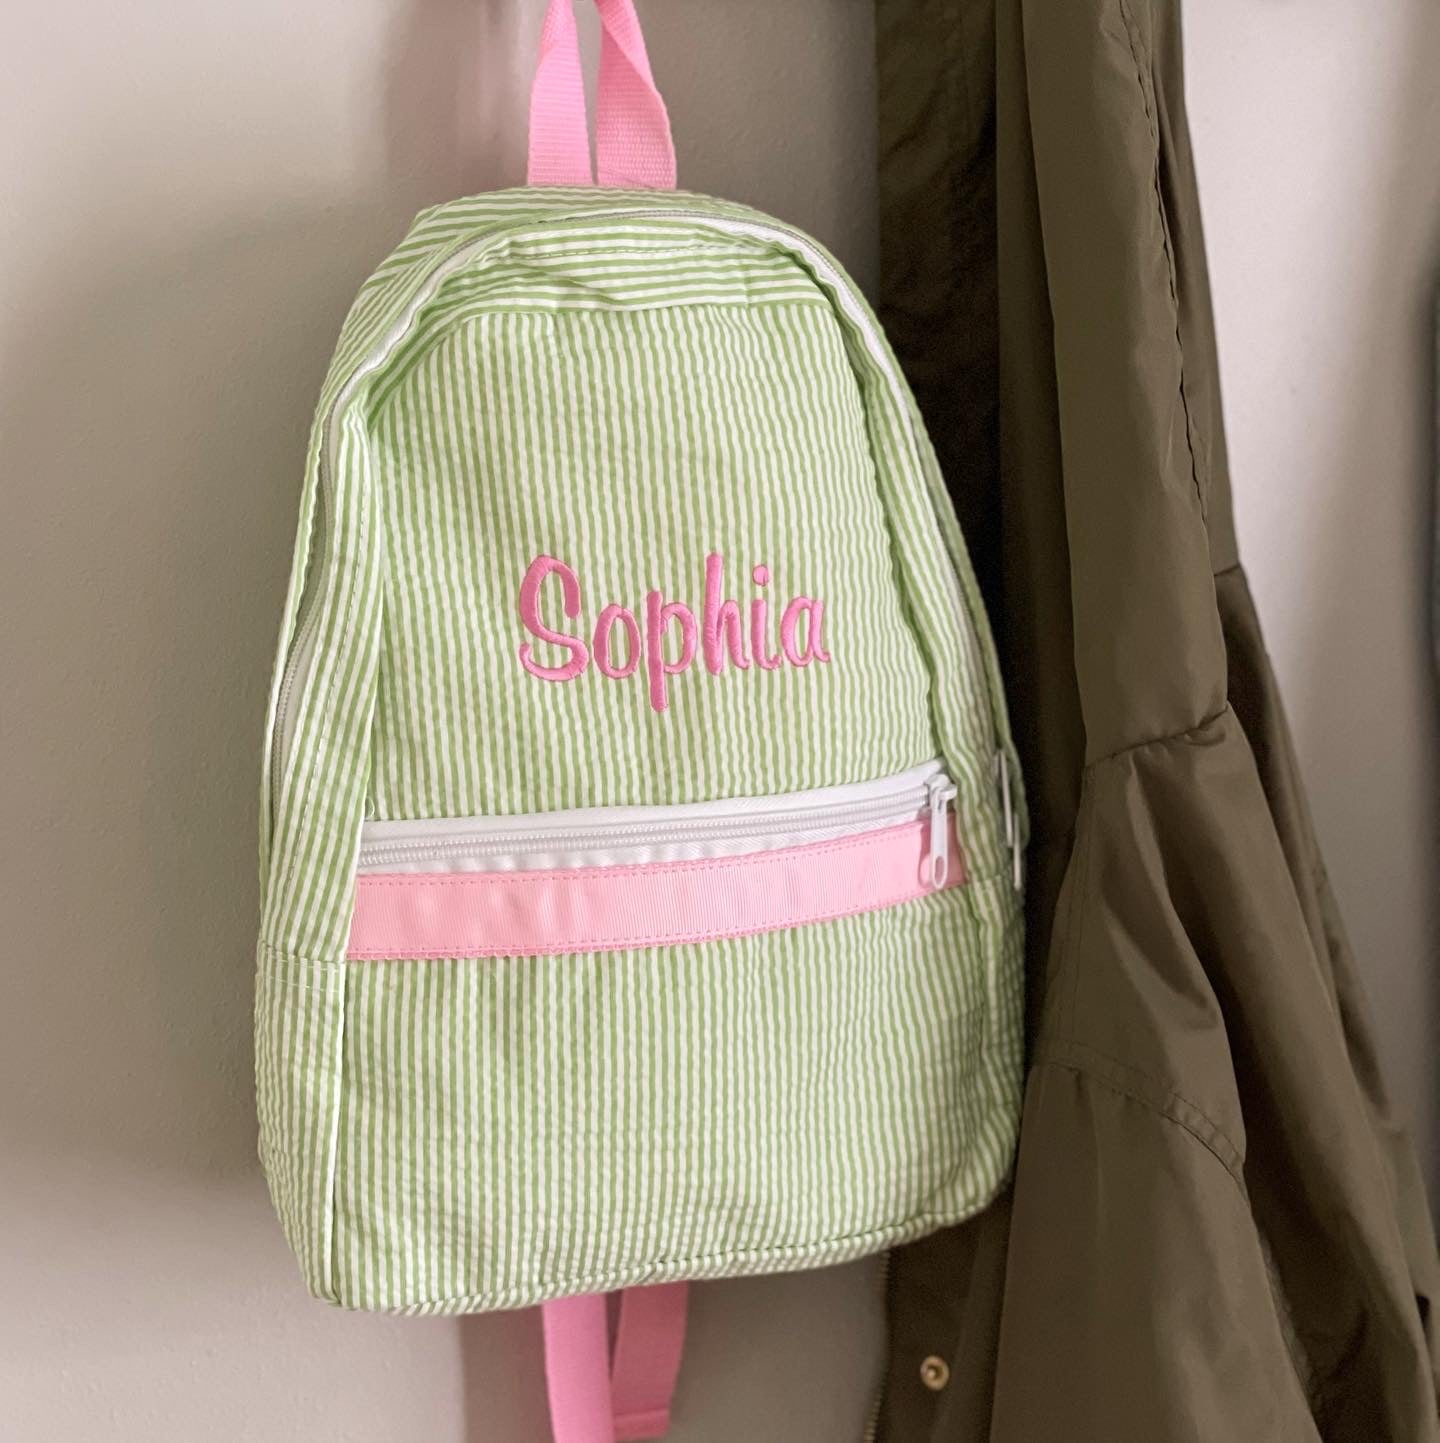 Personalized Seersucker Backpack with Floral Llama Alpha Applique